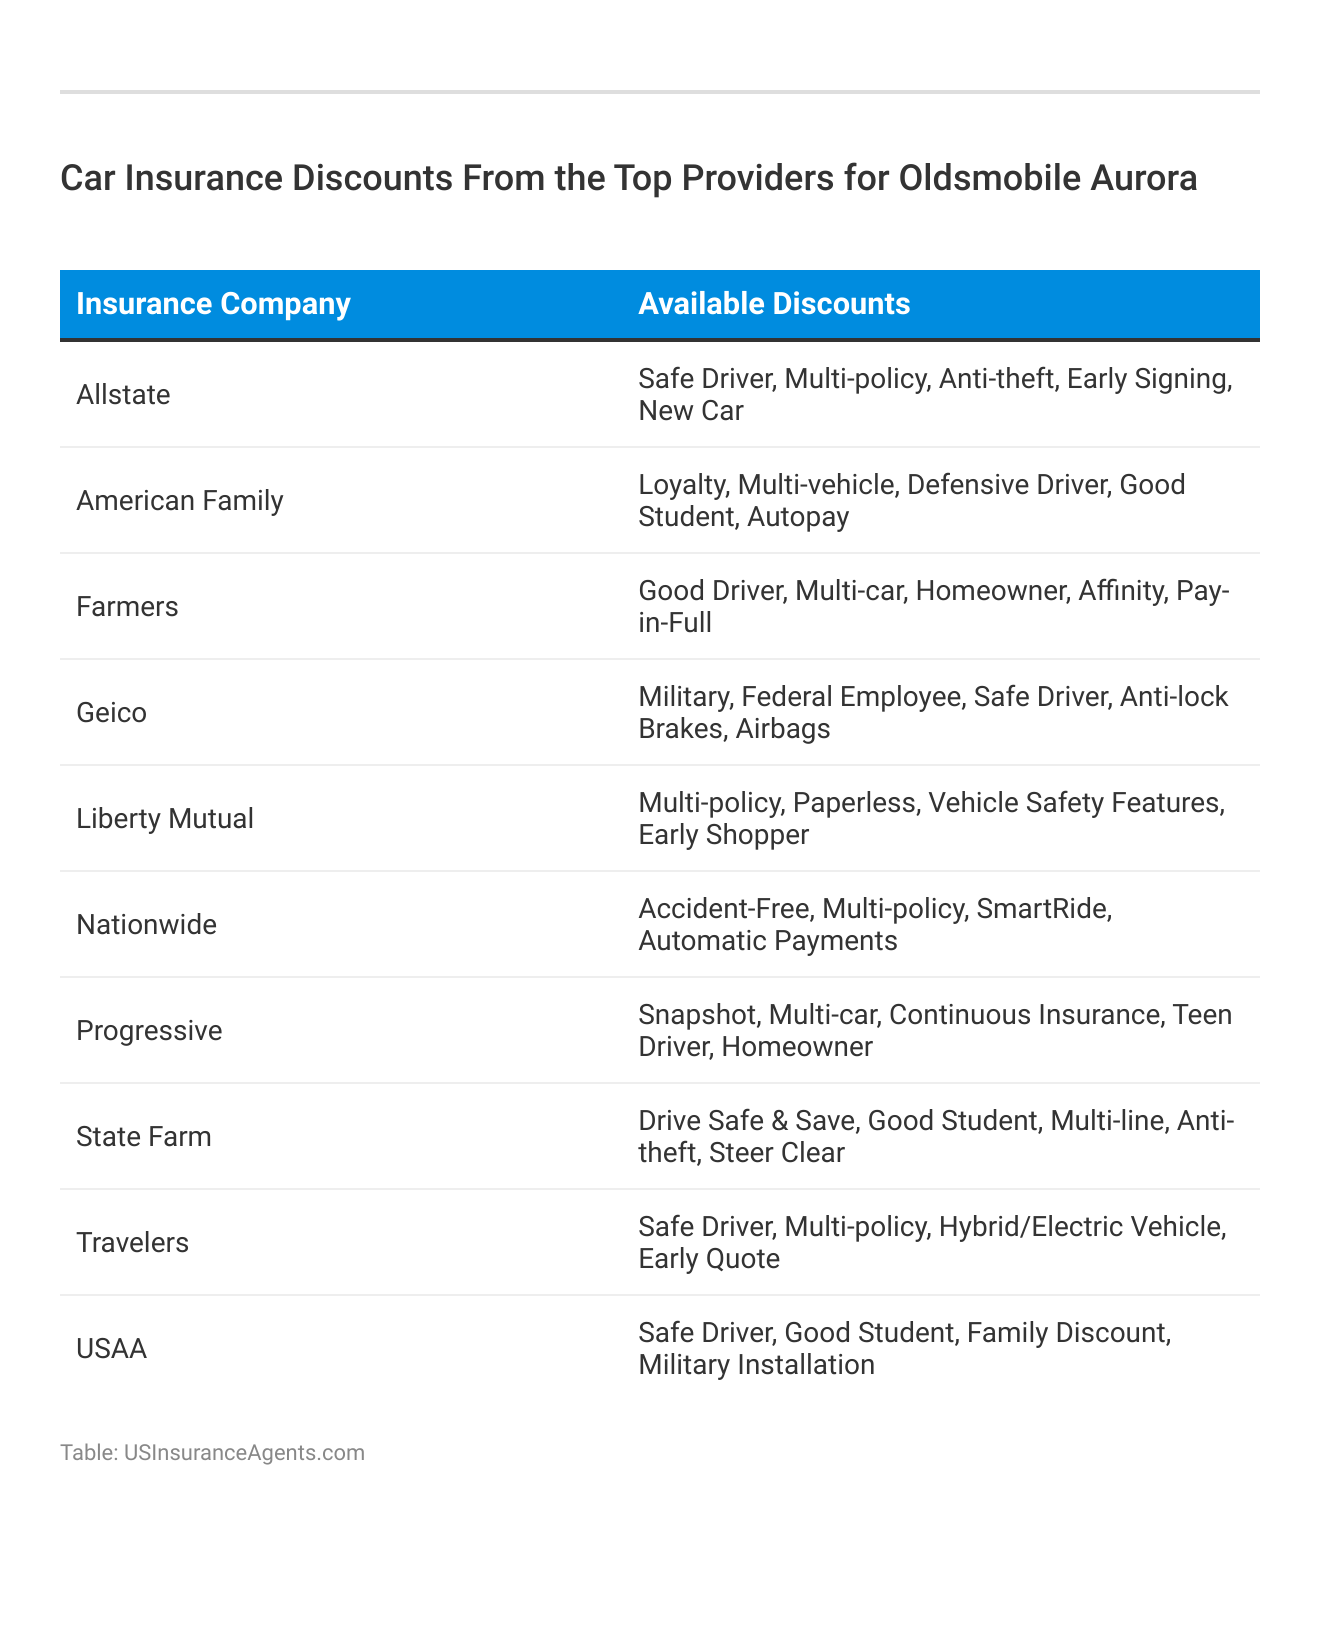 <h3>Car Insurance Discounts From the Top Providers for Oldsmobile Aurora</h3>